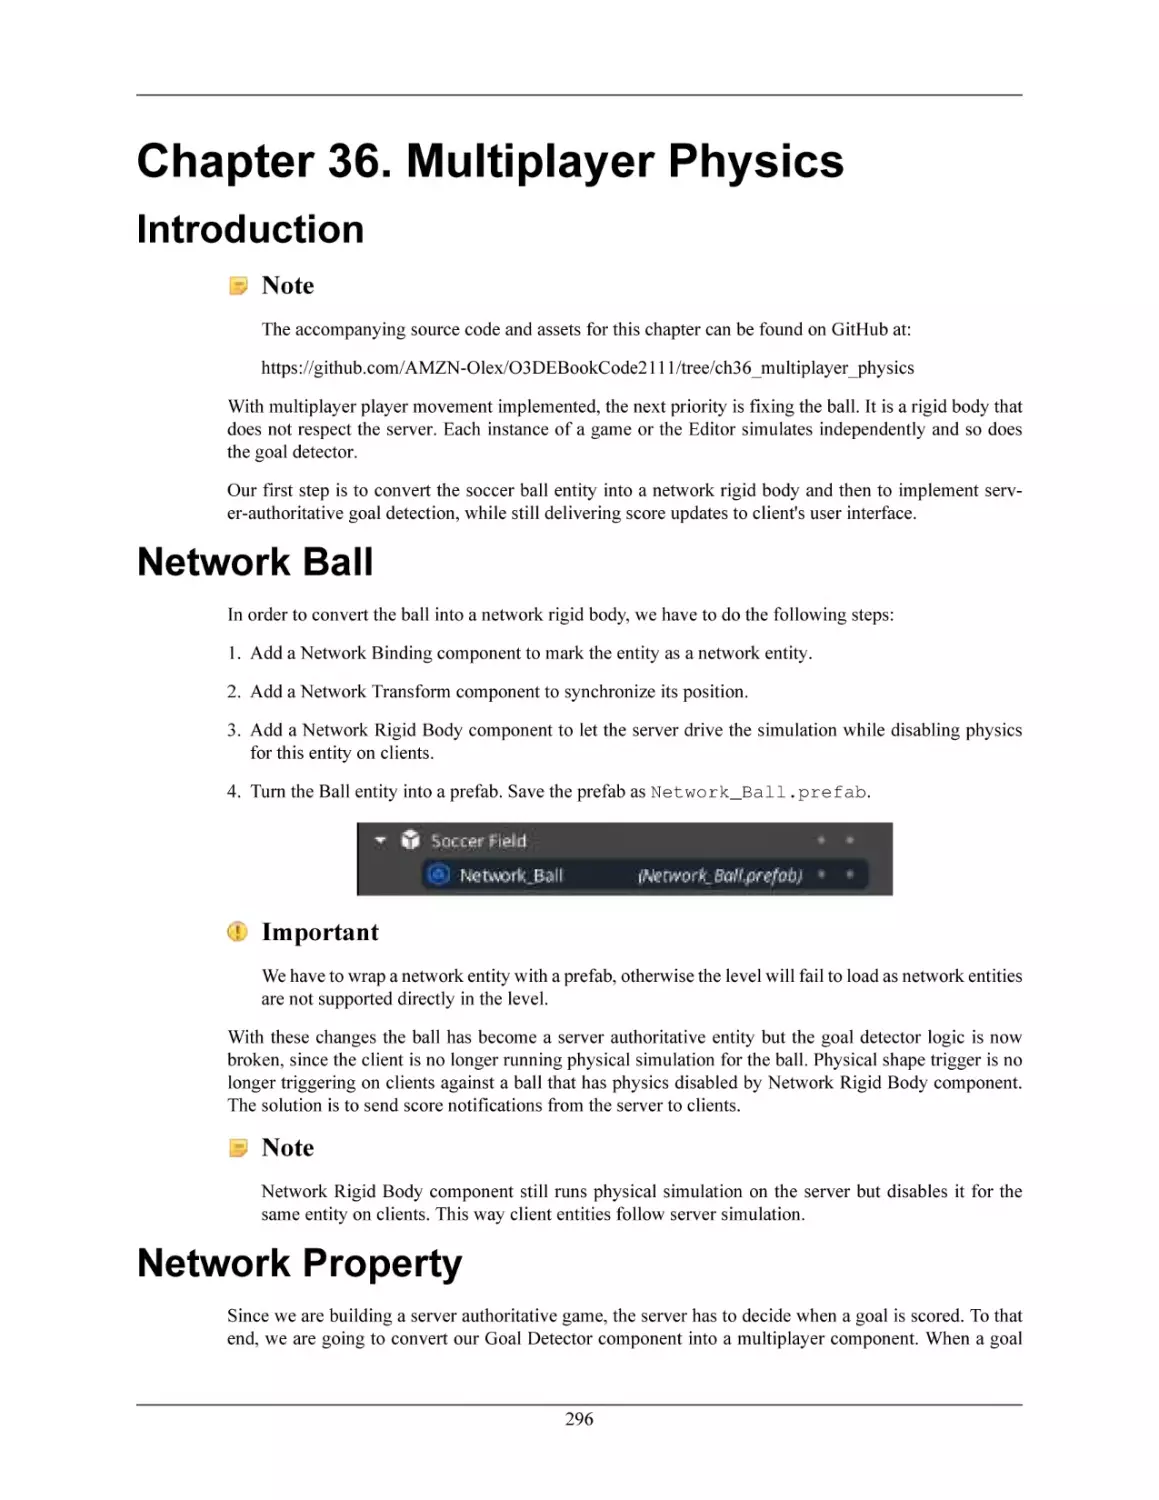 Chapter 36. Multiplayer Physics
Introduction
Network Ball
Network Property